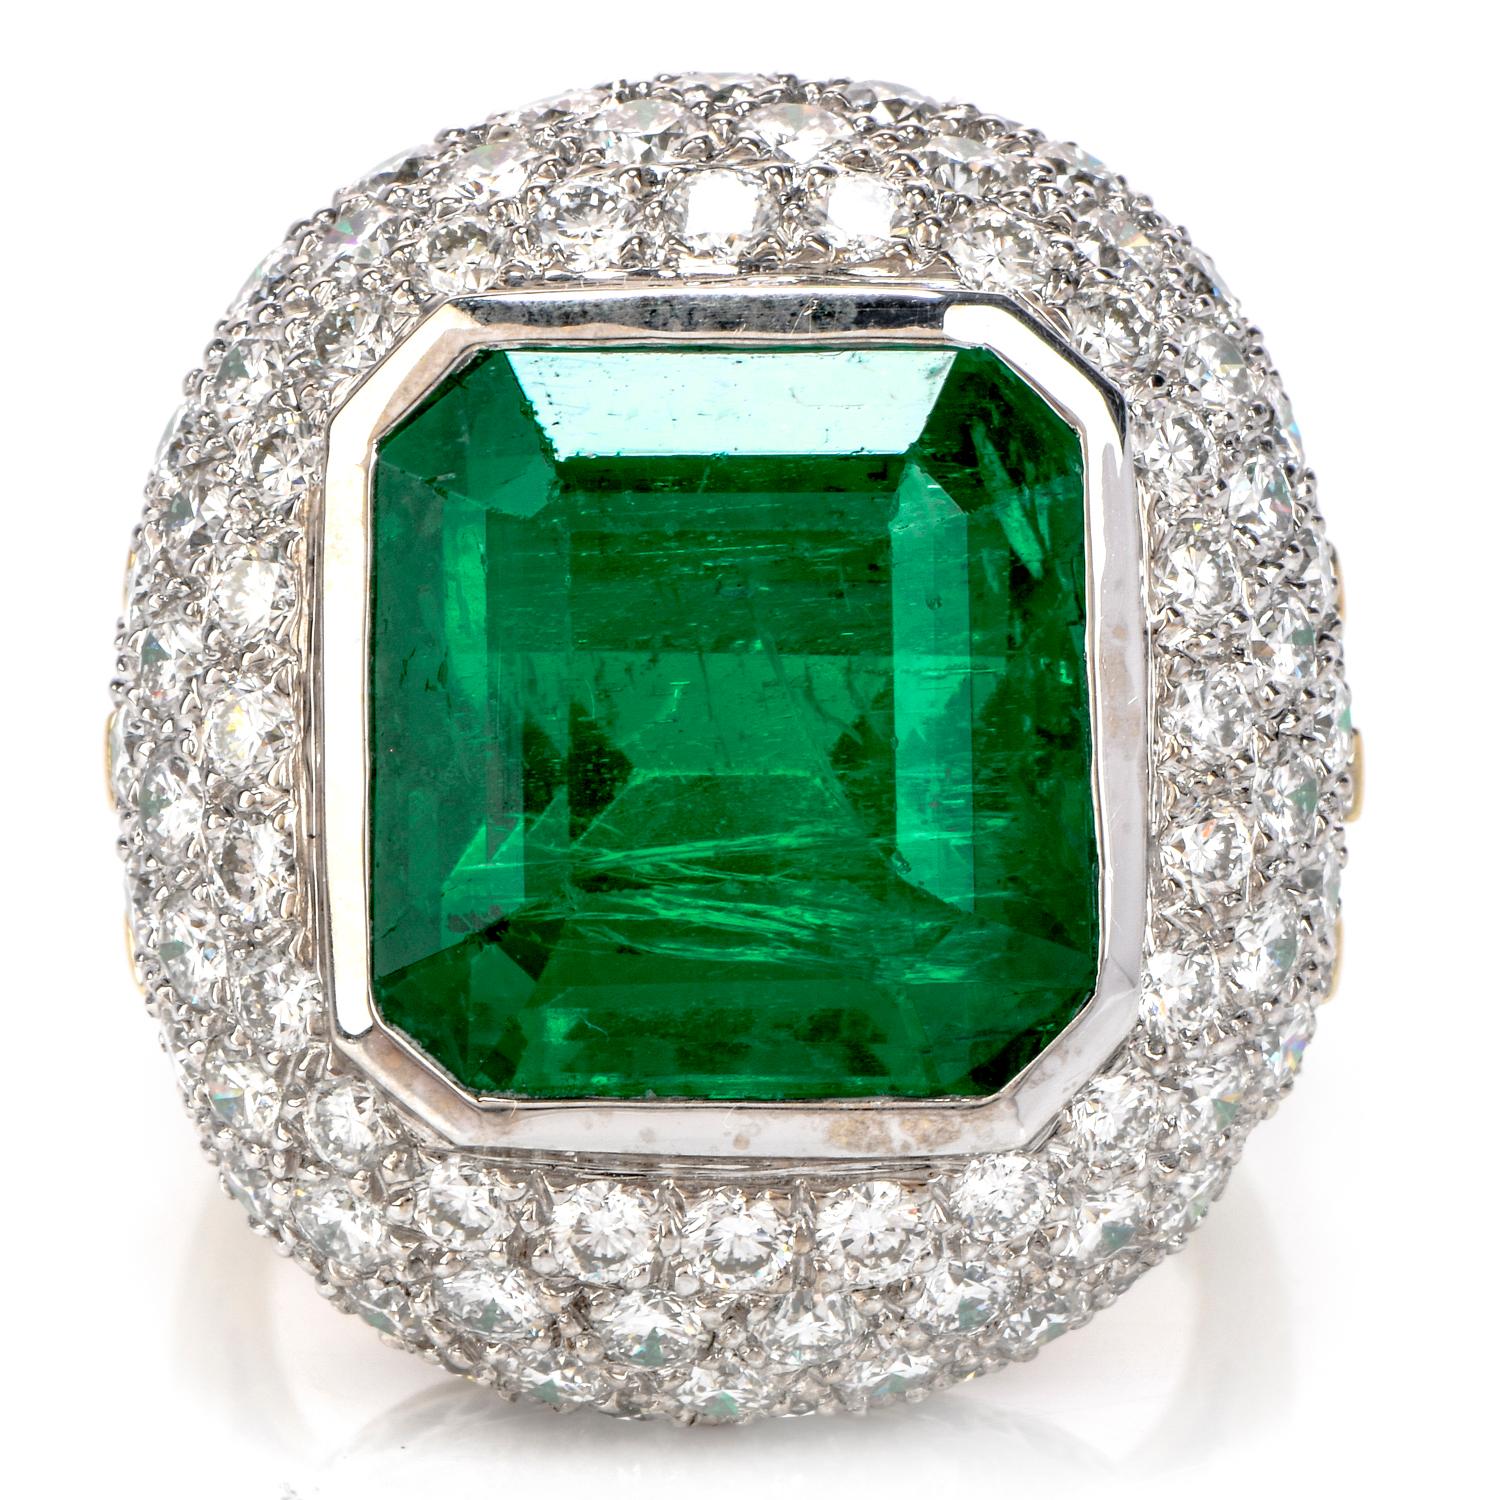 Treat yourself to this irresistibly stunning Estate Diamond Zambian Emerald 18K Gold Large Cocktail Ring!  This ring is crafted in 18 karat yellow gold and white gold.  The center gemstone is one square emerald cut, bezel set, genuine deep green